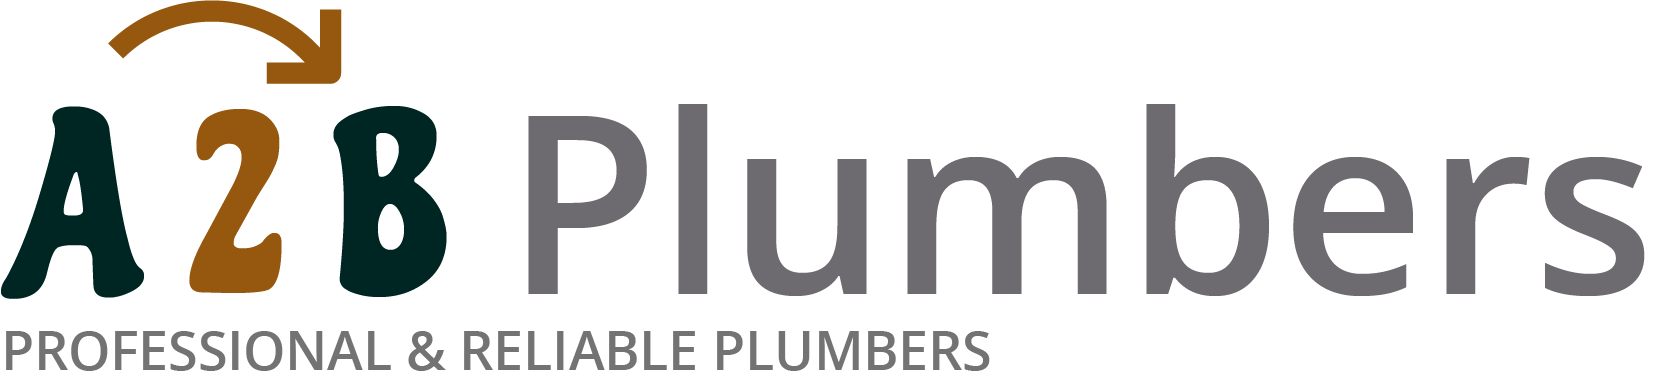 If you need a boiler installed, a radiator repaired or a leaking tap fixed, call us now - we provide services for properties in Penistone and the local area.